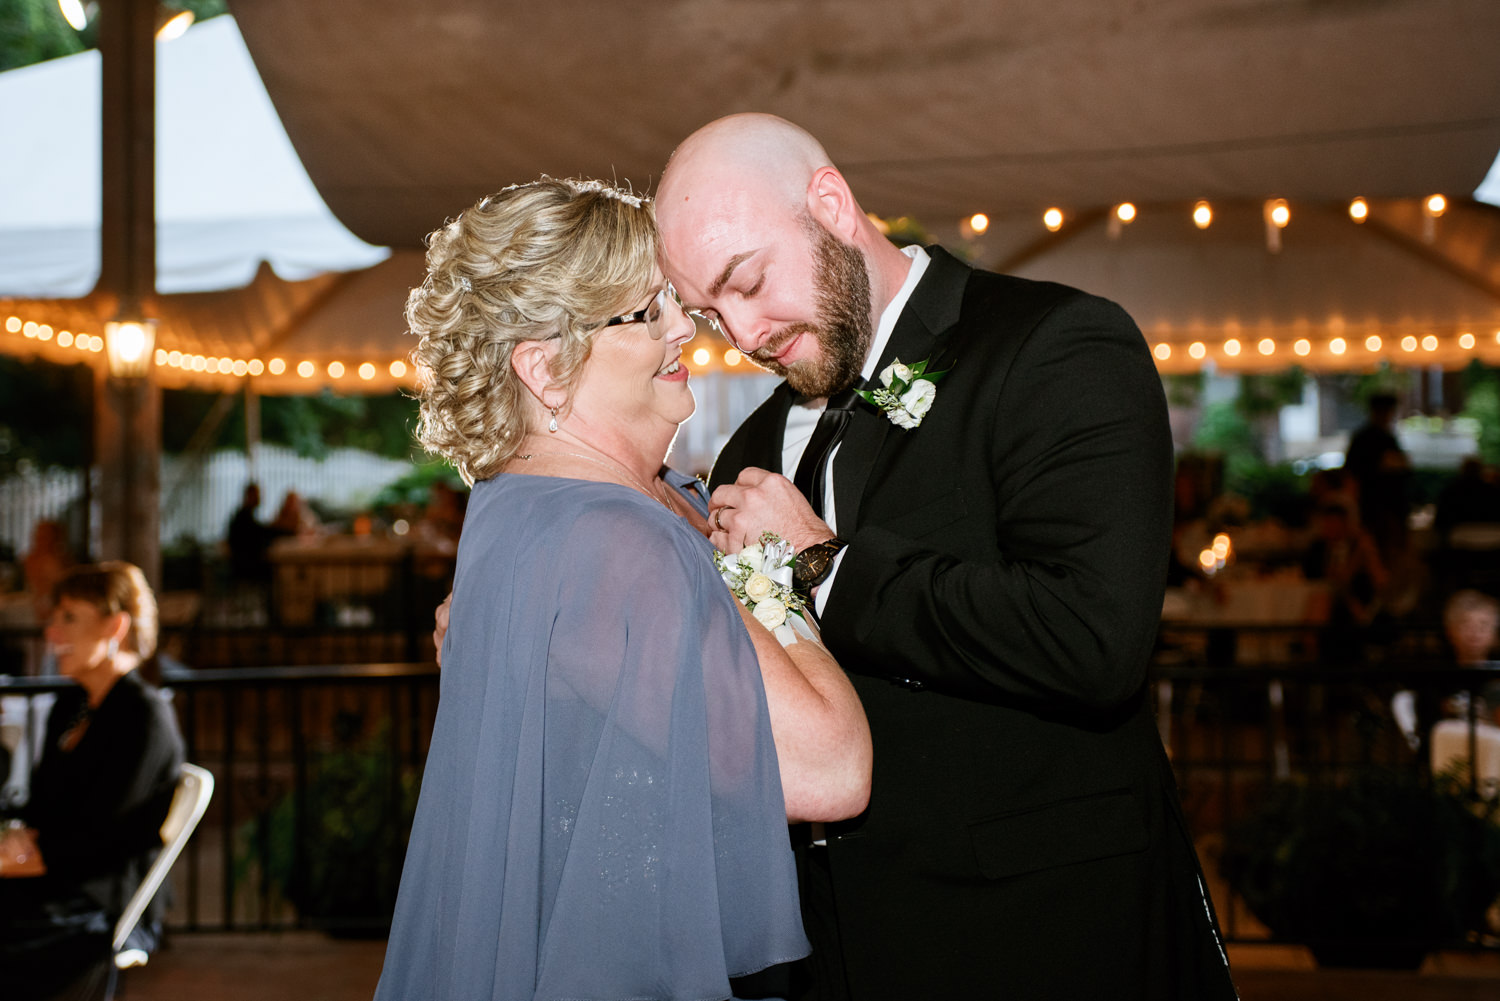 Groom and Mother dancing at St. Louis wedding venue Lemp Mansion; St. Louis wedding photography